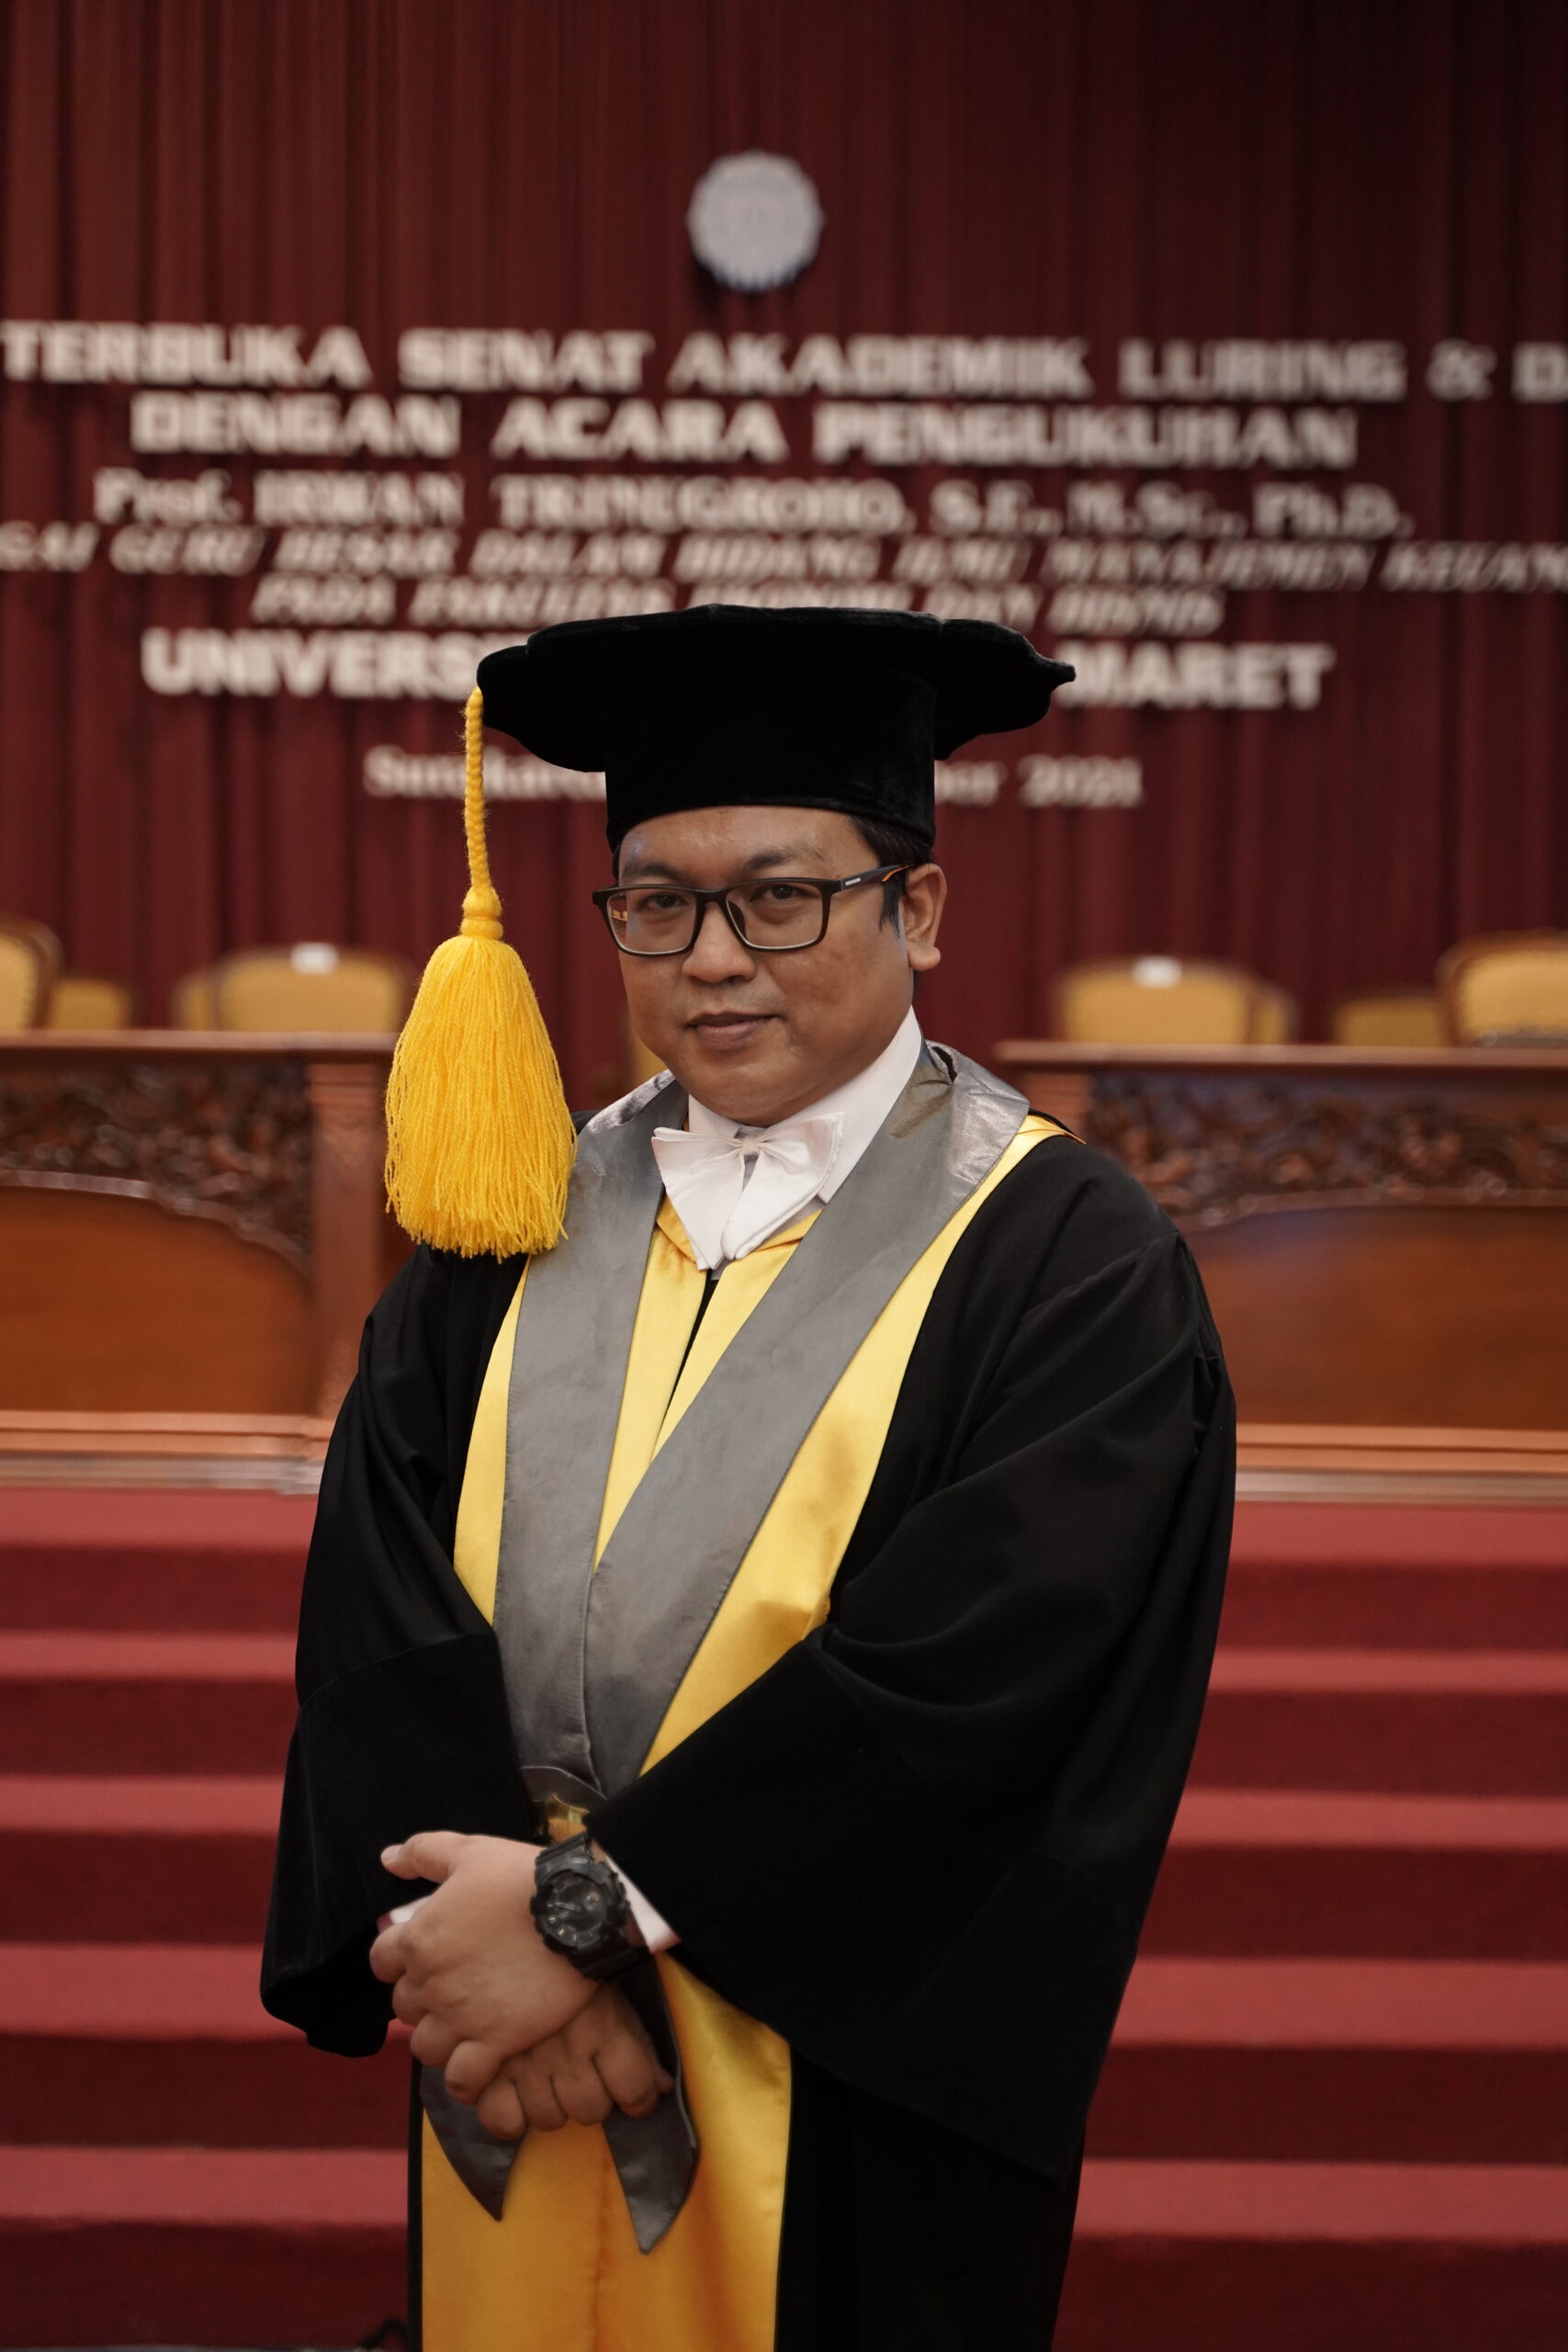 Chief of UNS Fintech Inaugurated as The Youngest Professor in UNS